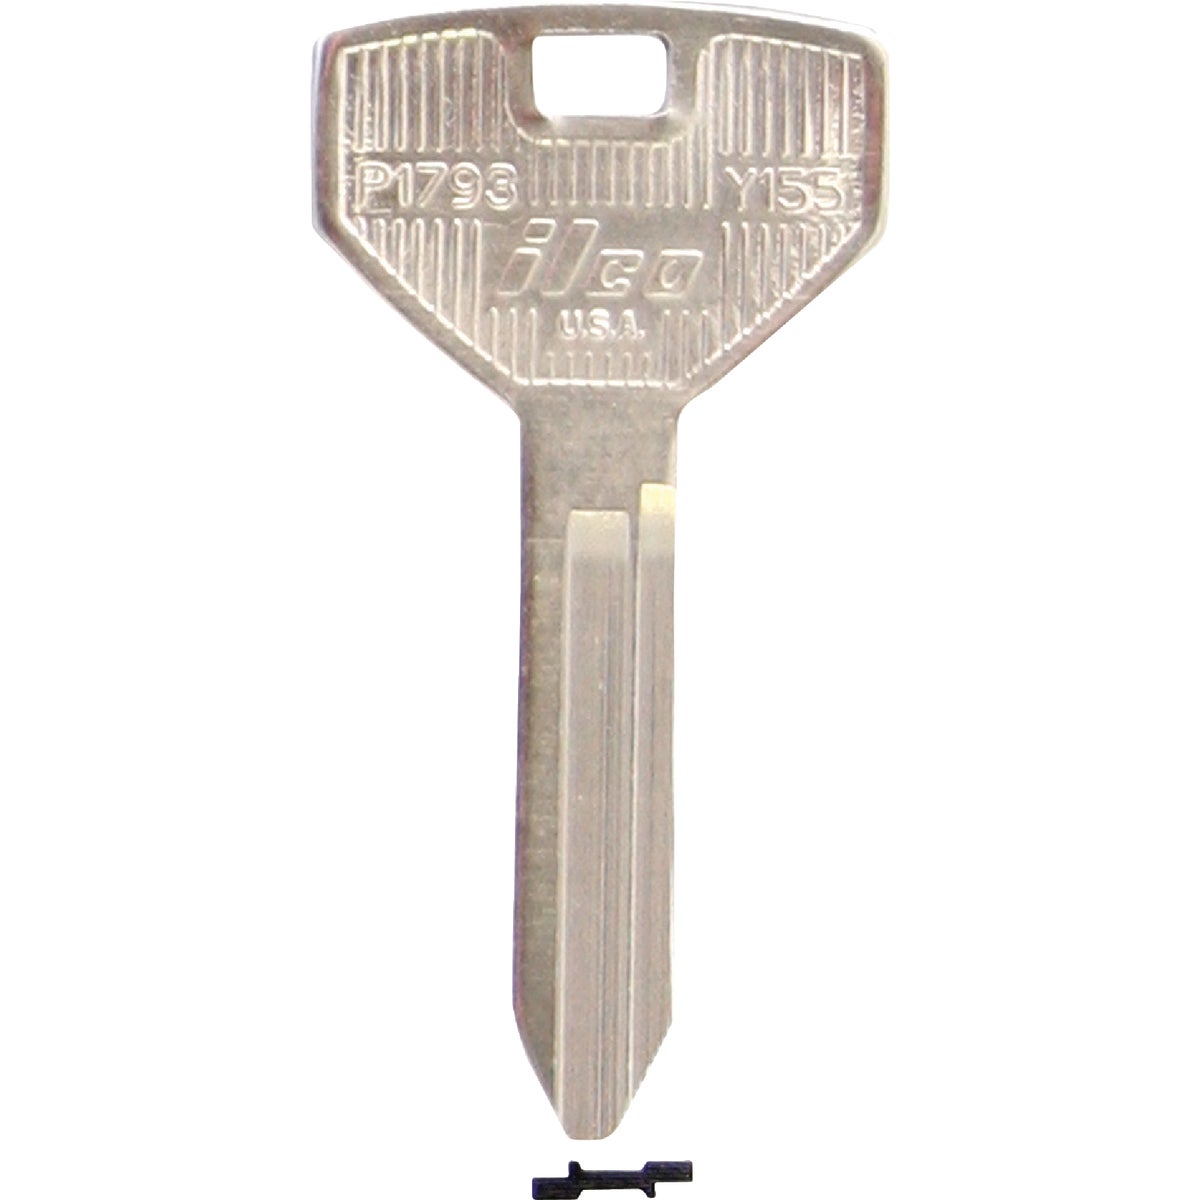 ILCO Chrysler Nickel Plated Automotive Key Y155 / P1793 (10-Pack)